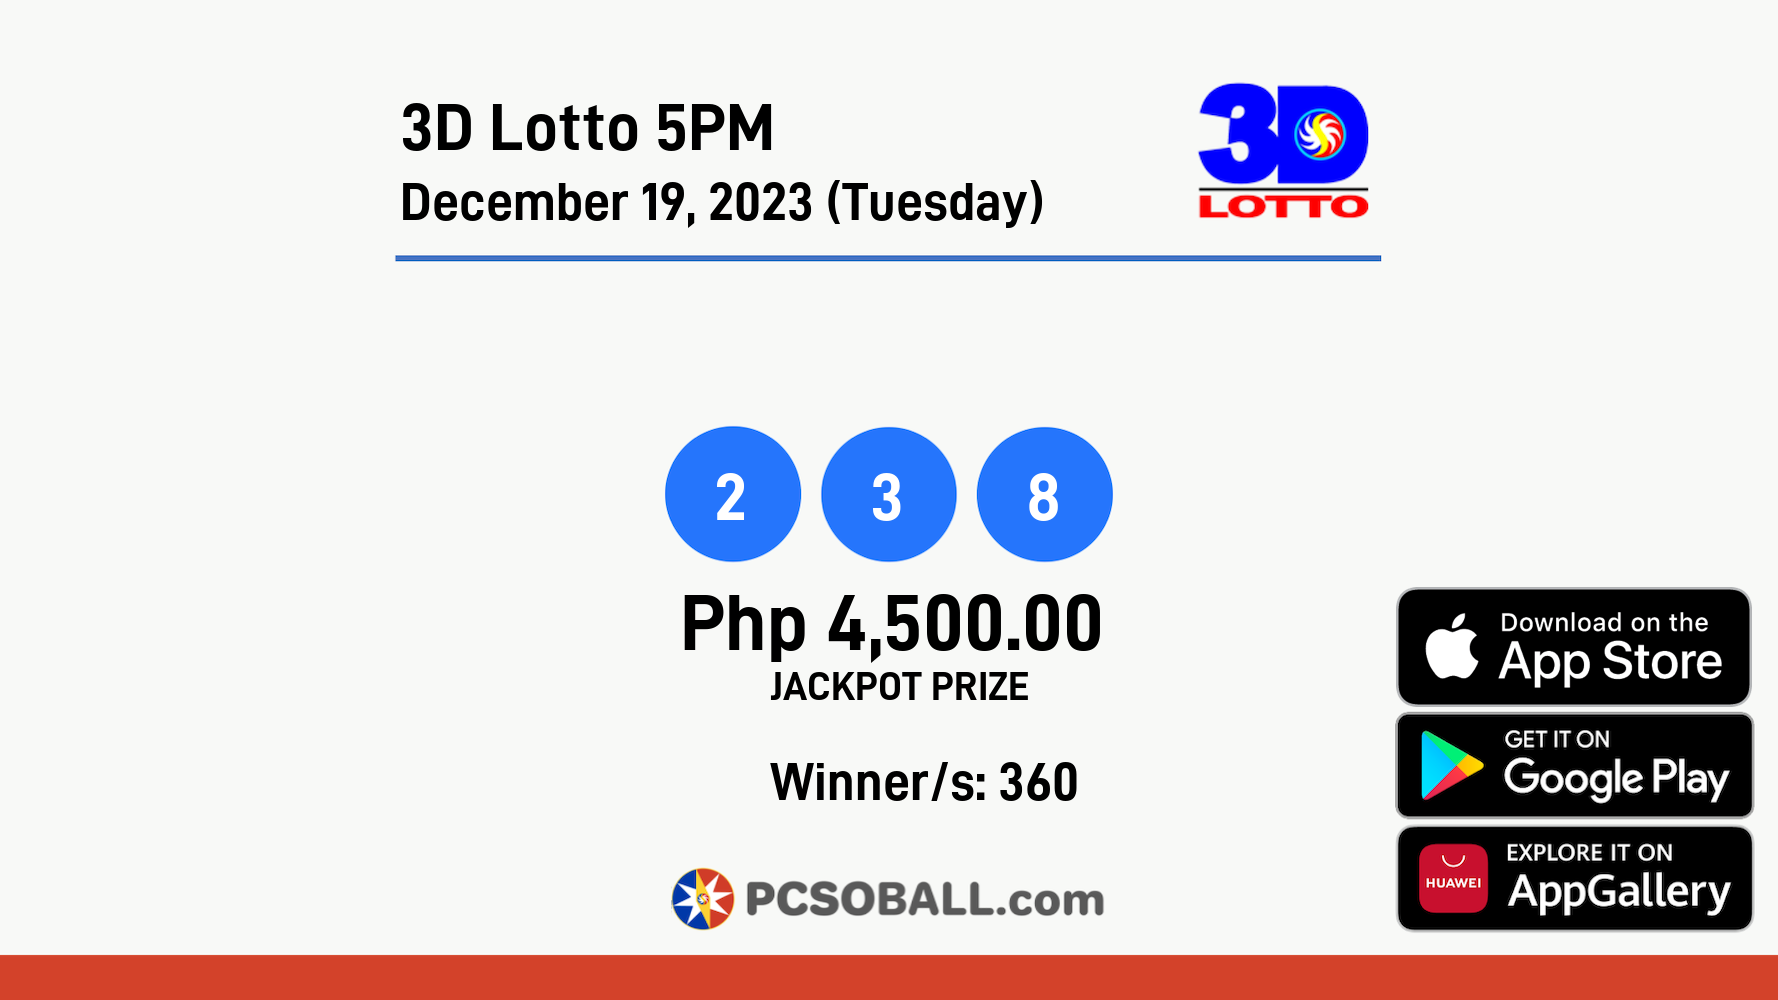 3D Lotto 5PM December 19, 2023 (Tuesday) Result